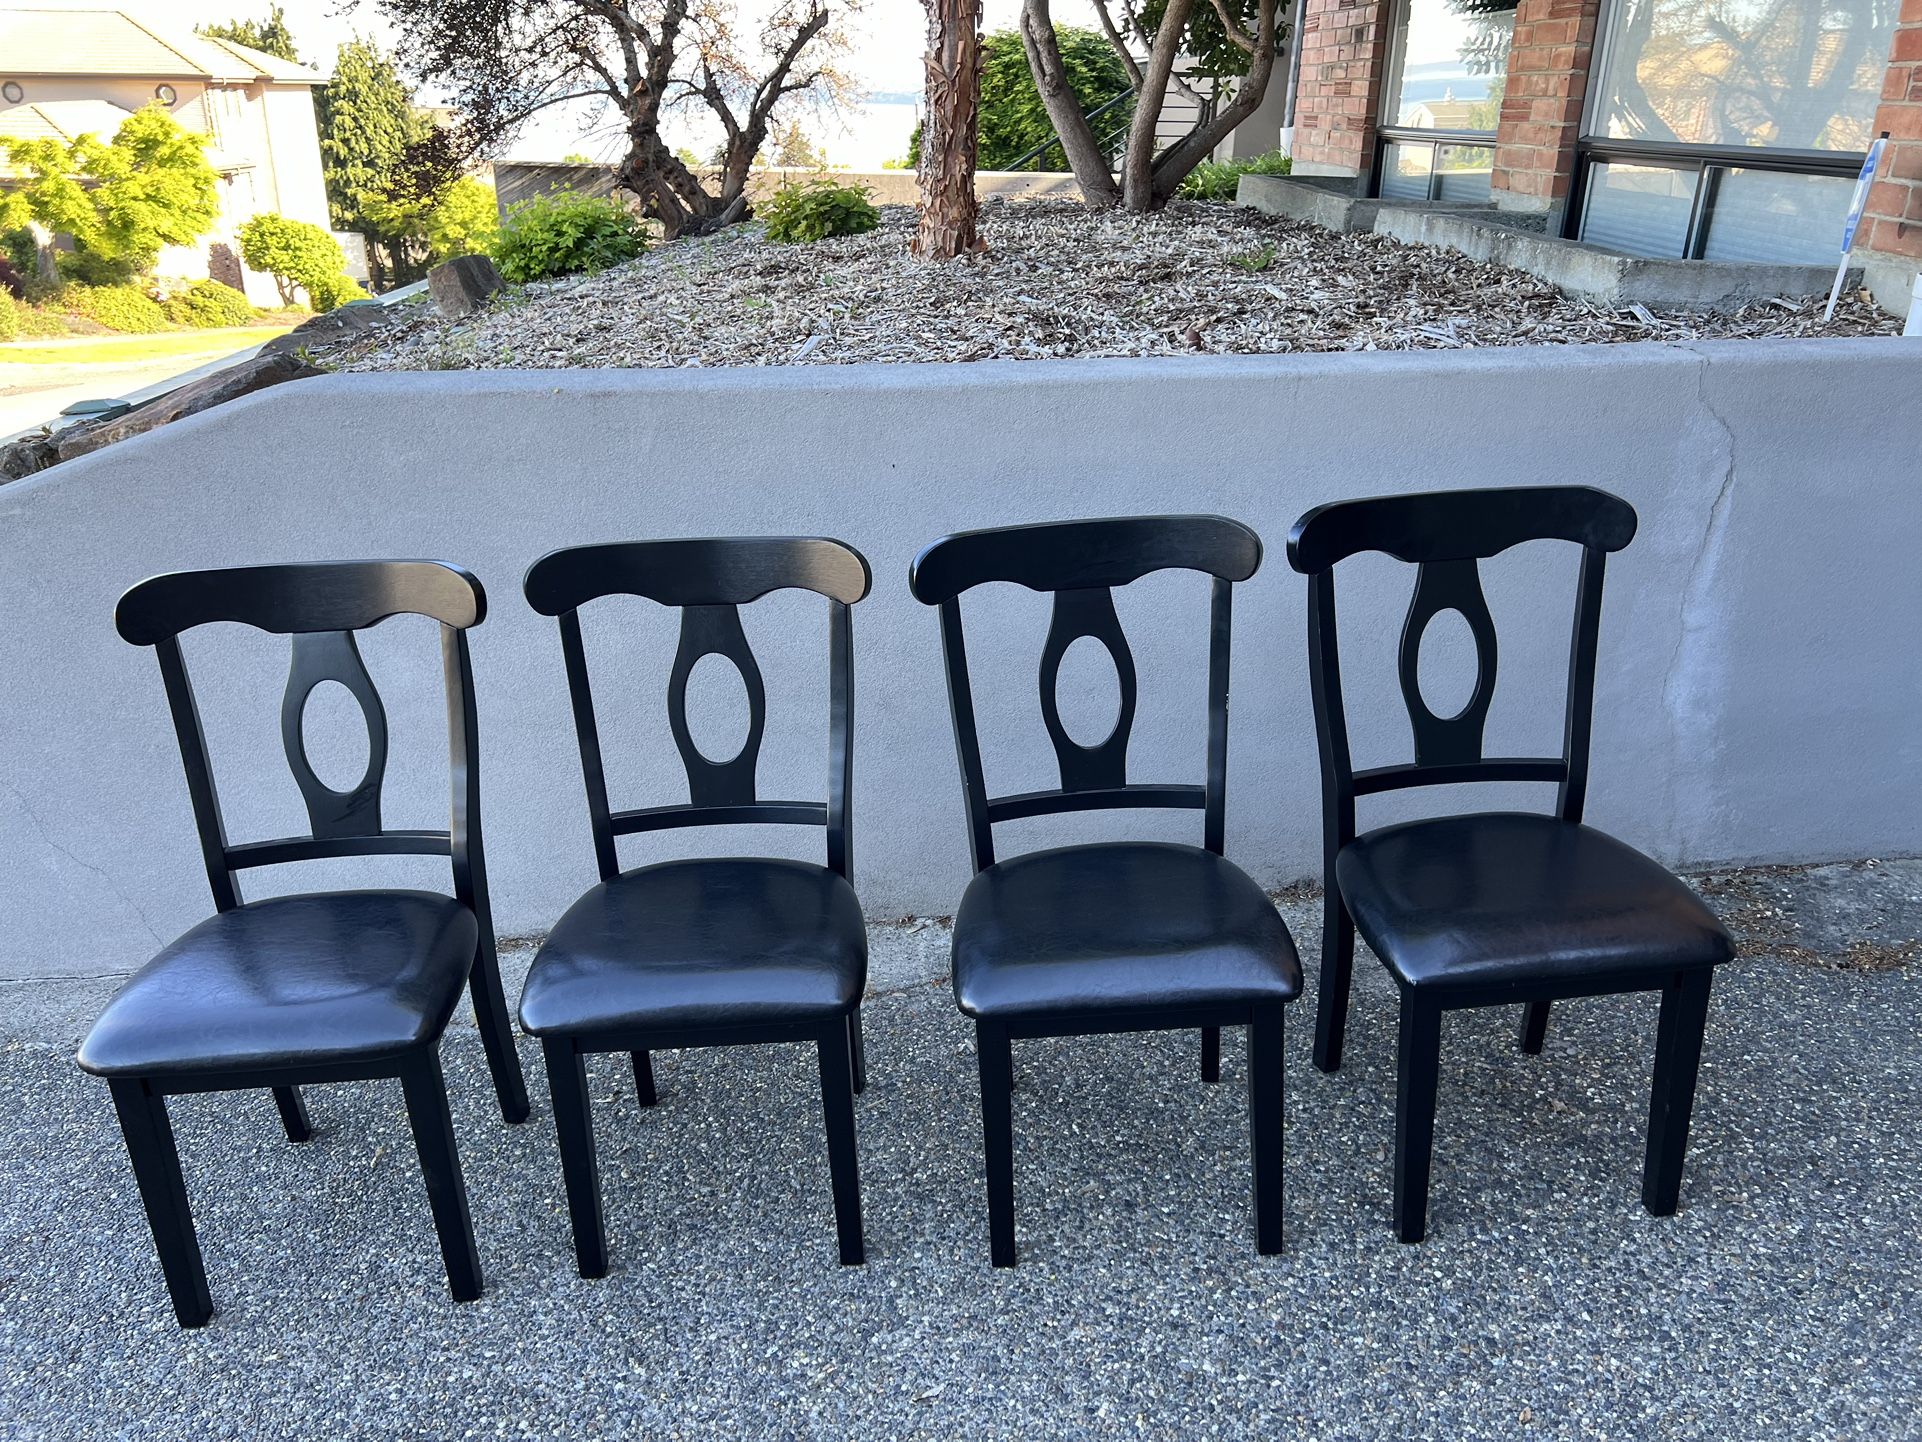 Four Dining Chairs - $100